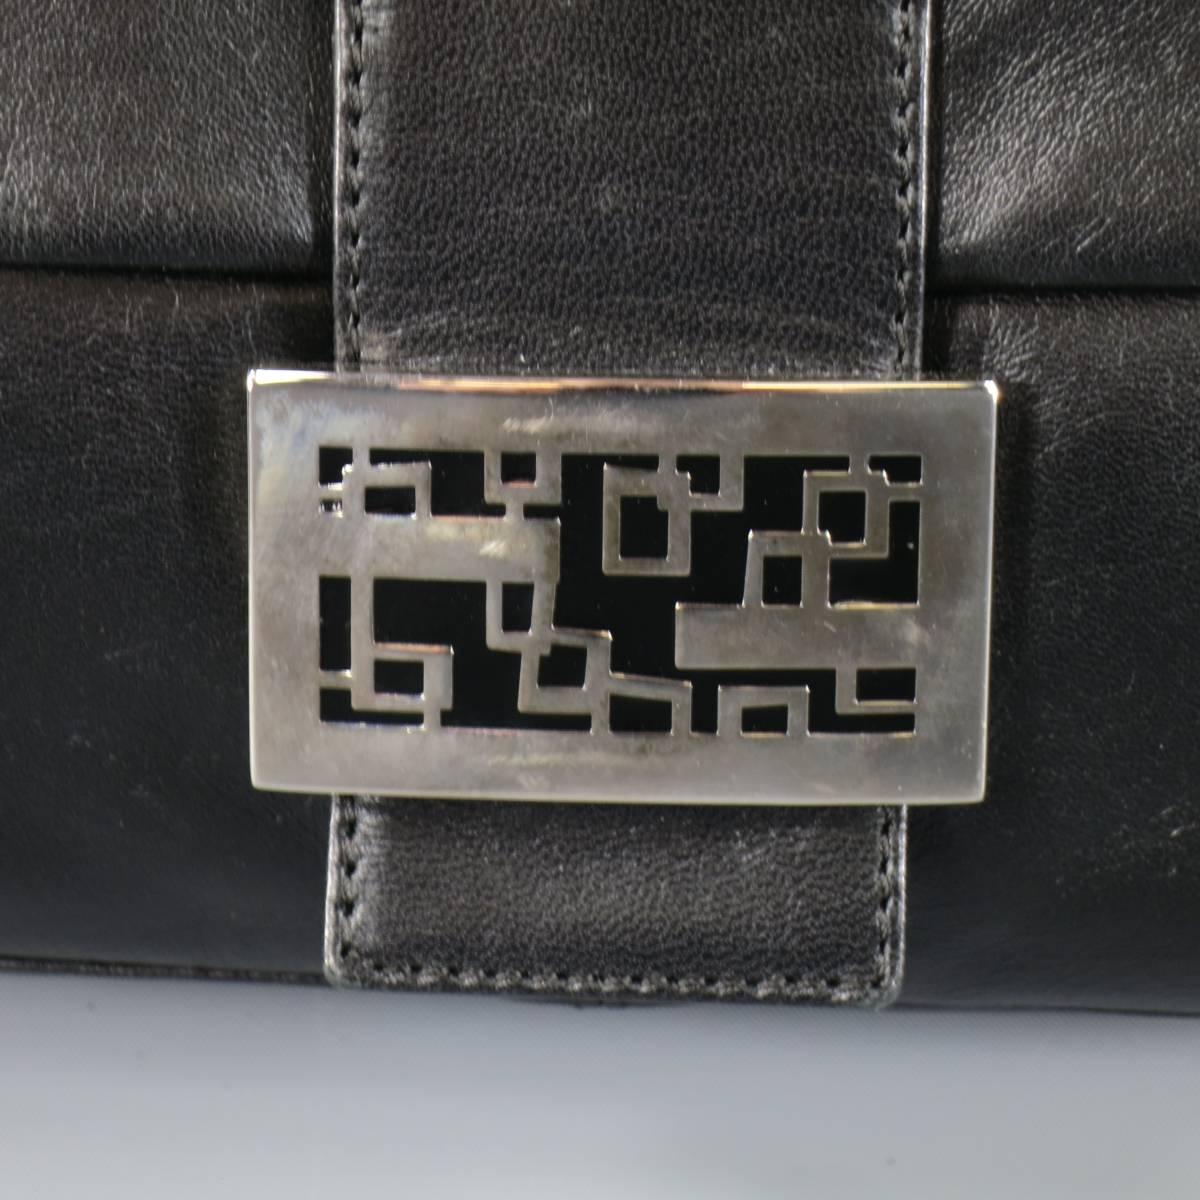 Classic FENDI rectangular handbag comes in a soft, smooth leather and features a fold over snap closure with geometric silver metal and black enamel buckle detail. Made in Italy.
 
Good Pre-Owned Condition.
 
Measurements:
 
Length: 10.5 in.
Width: